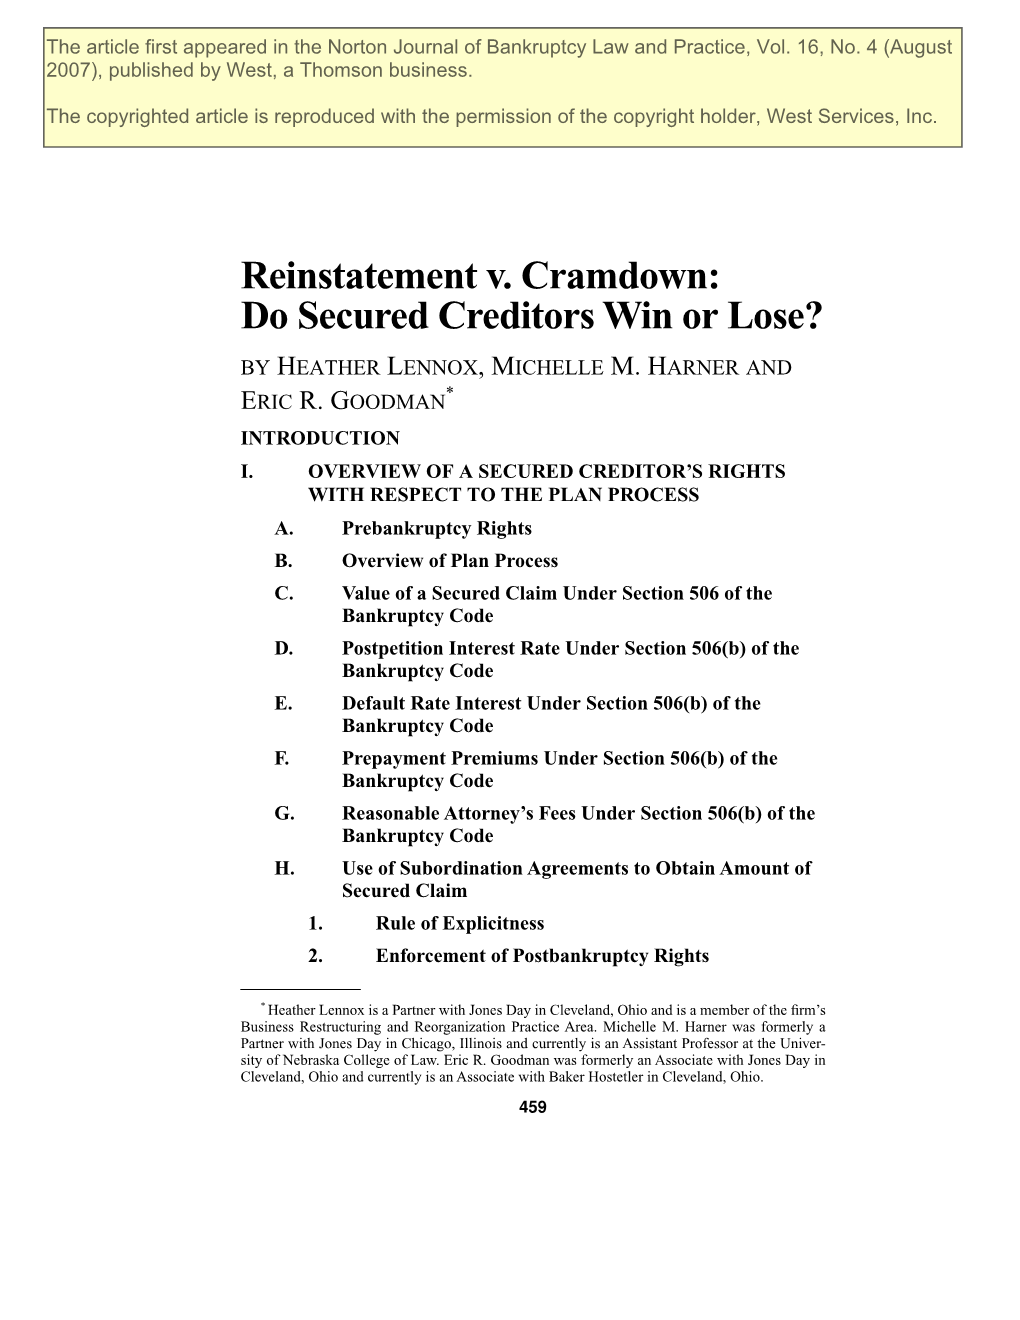 Reinstatement V. Cramdown: Do Secured Creditors Win Or Lose? by HEATHER LENNOX, MICHELLE M